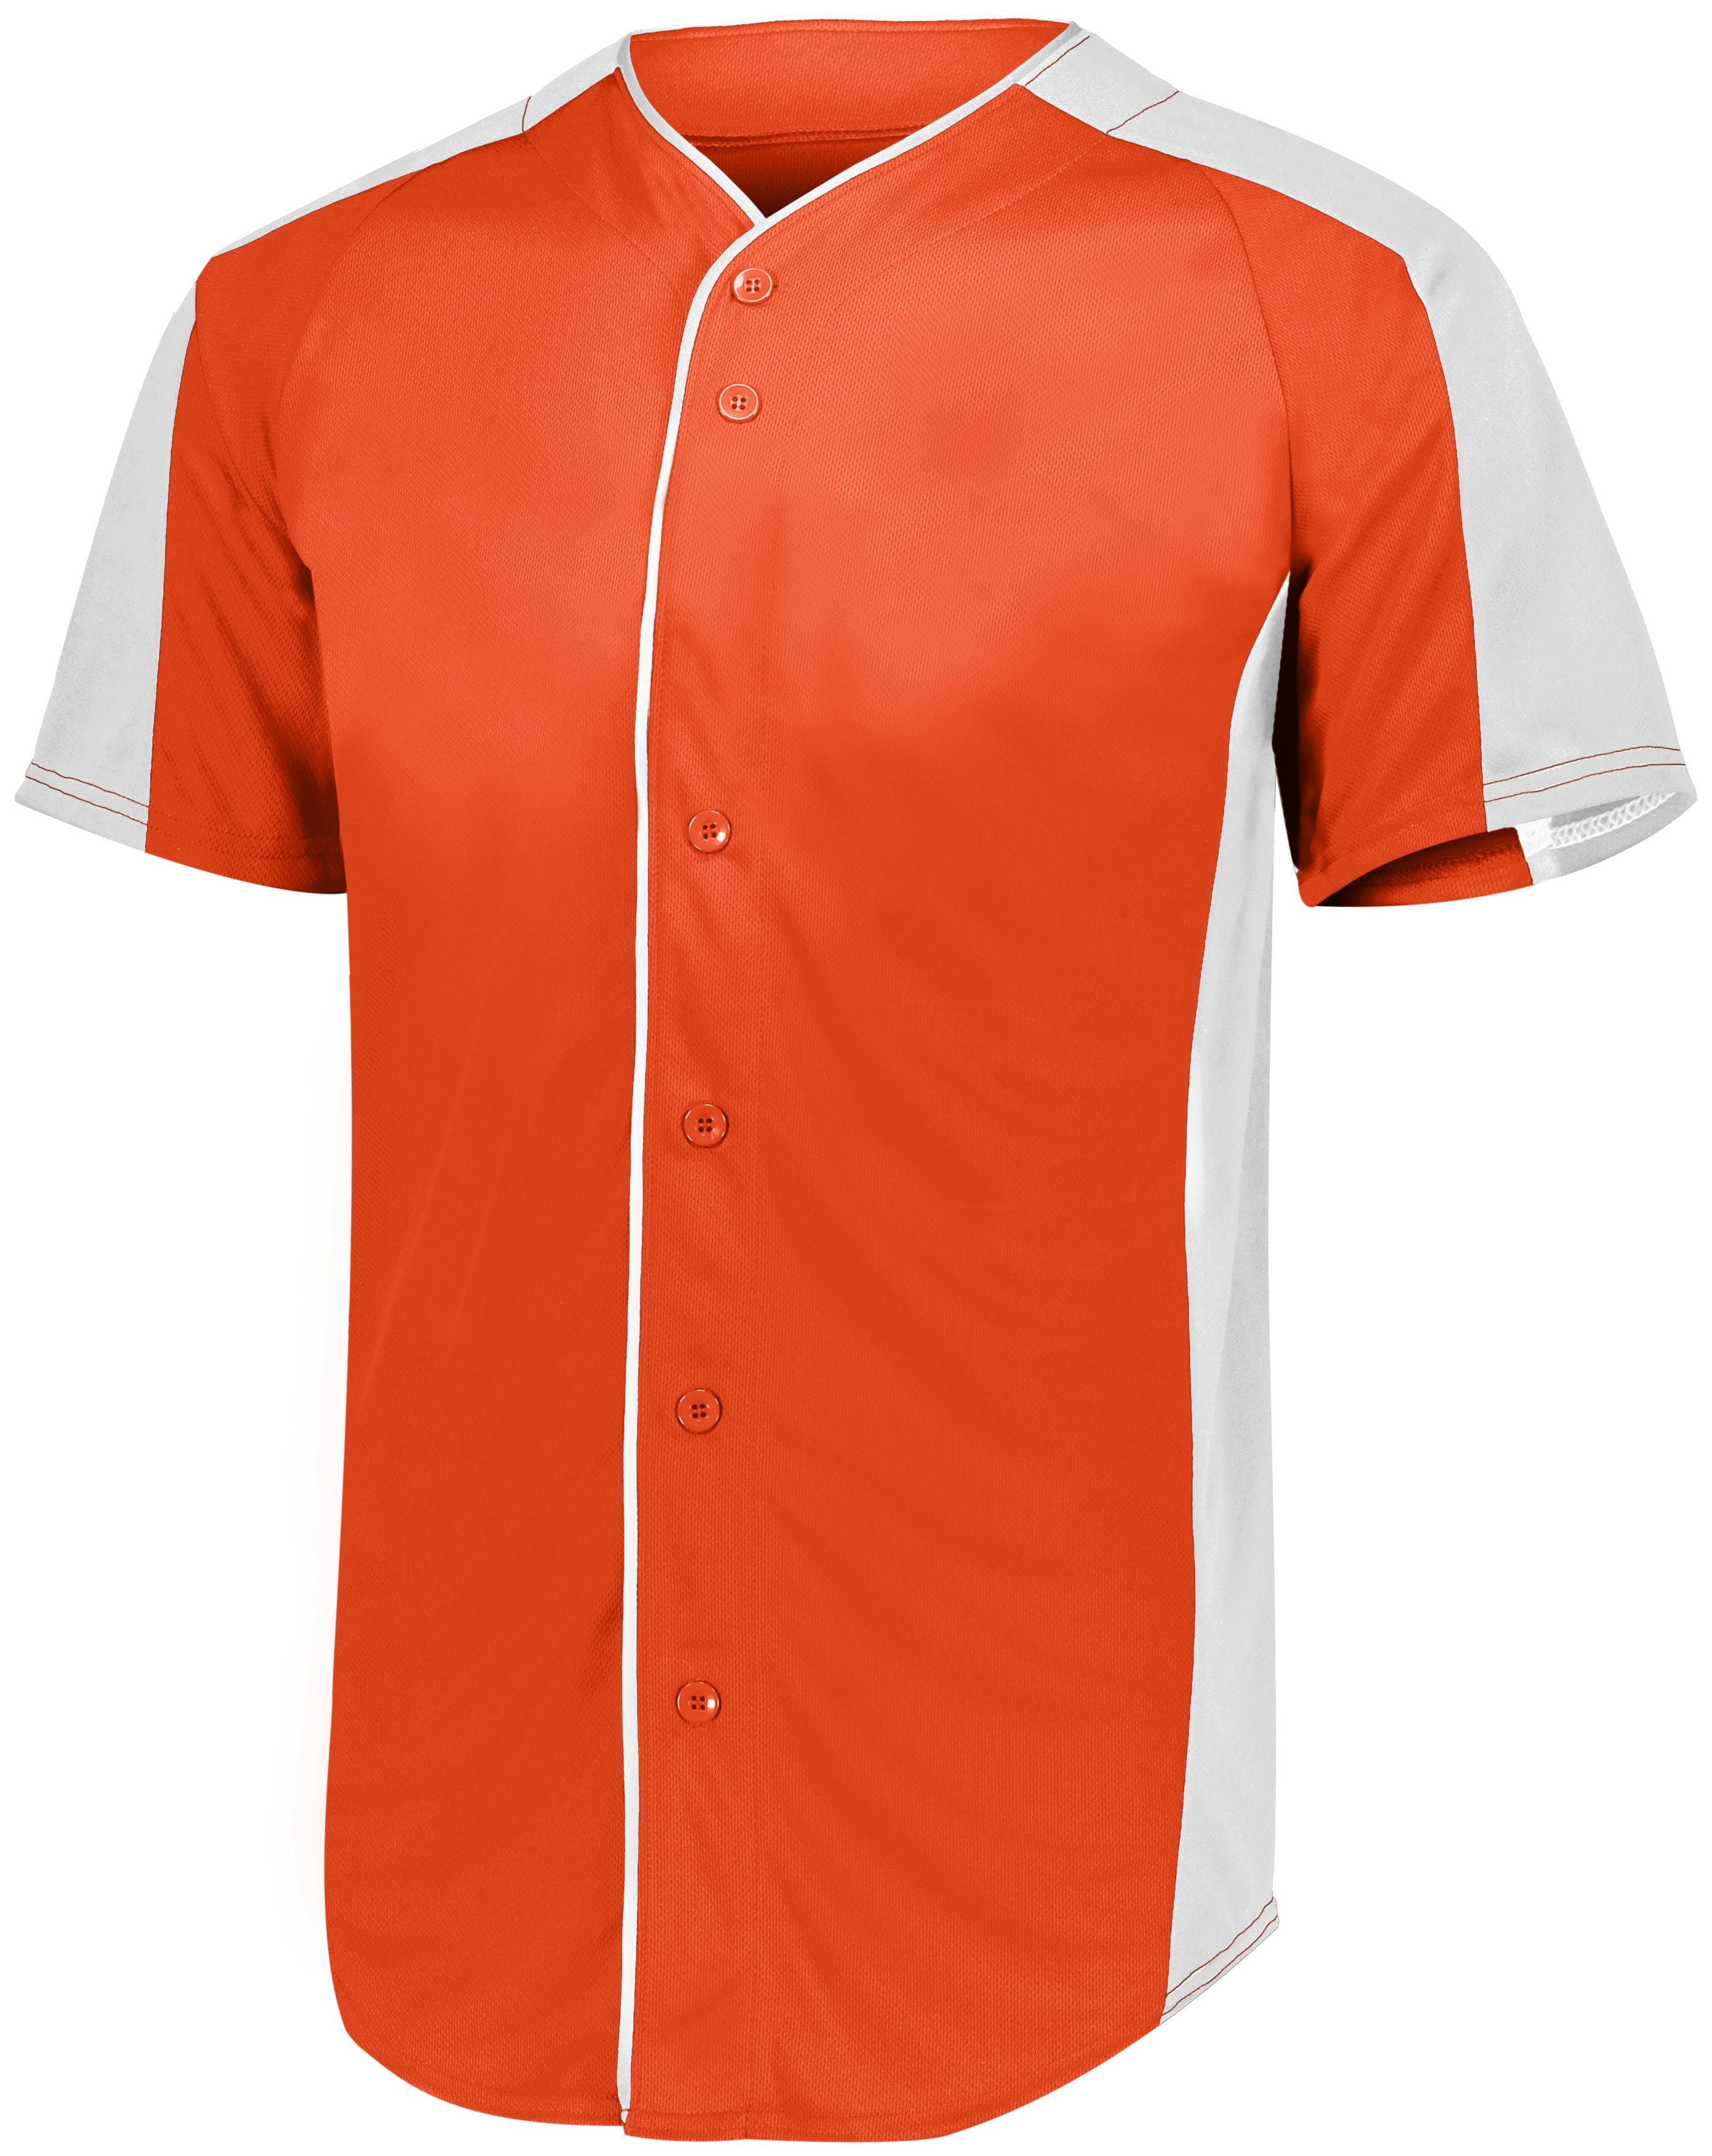 Augusta Sportswear Full-Button Baseball Jersey in Orange/White  -Part of the Adult, Adult-Jersey, Augusta-Products, Baseball, Shirts, All-Sports, All-Sports-1 product lines at KanaleyCreations.com